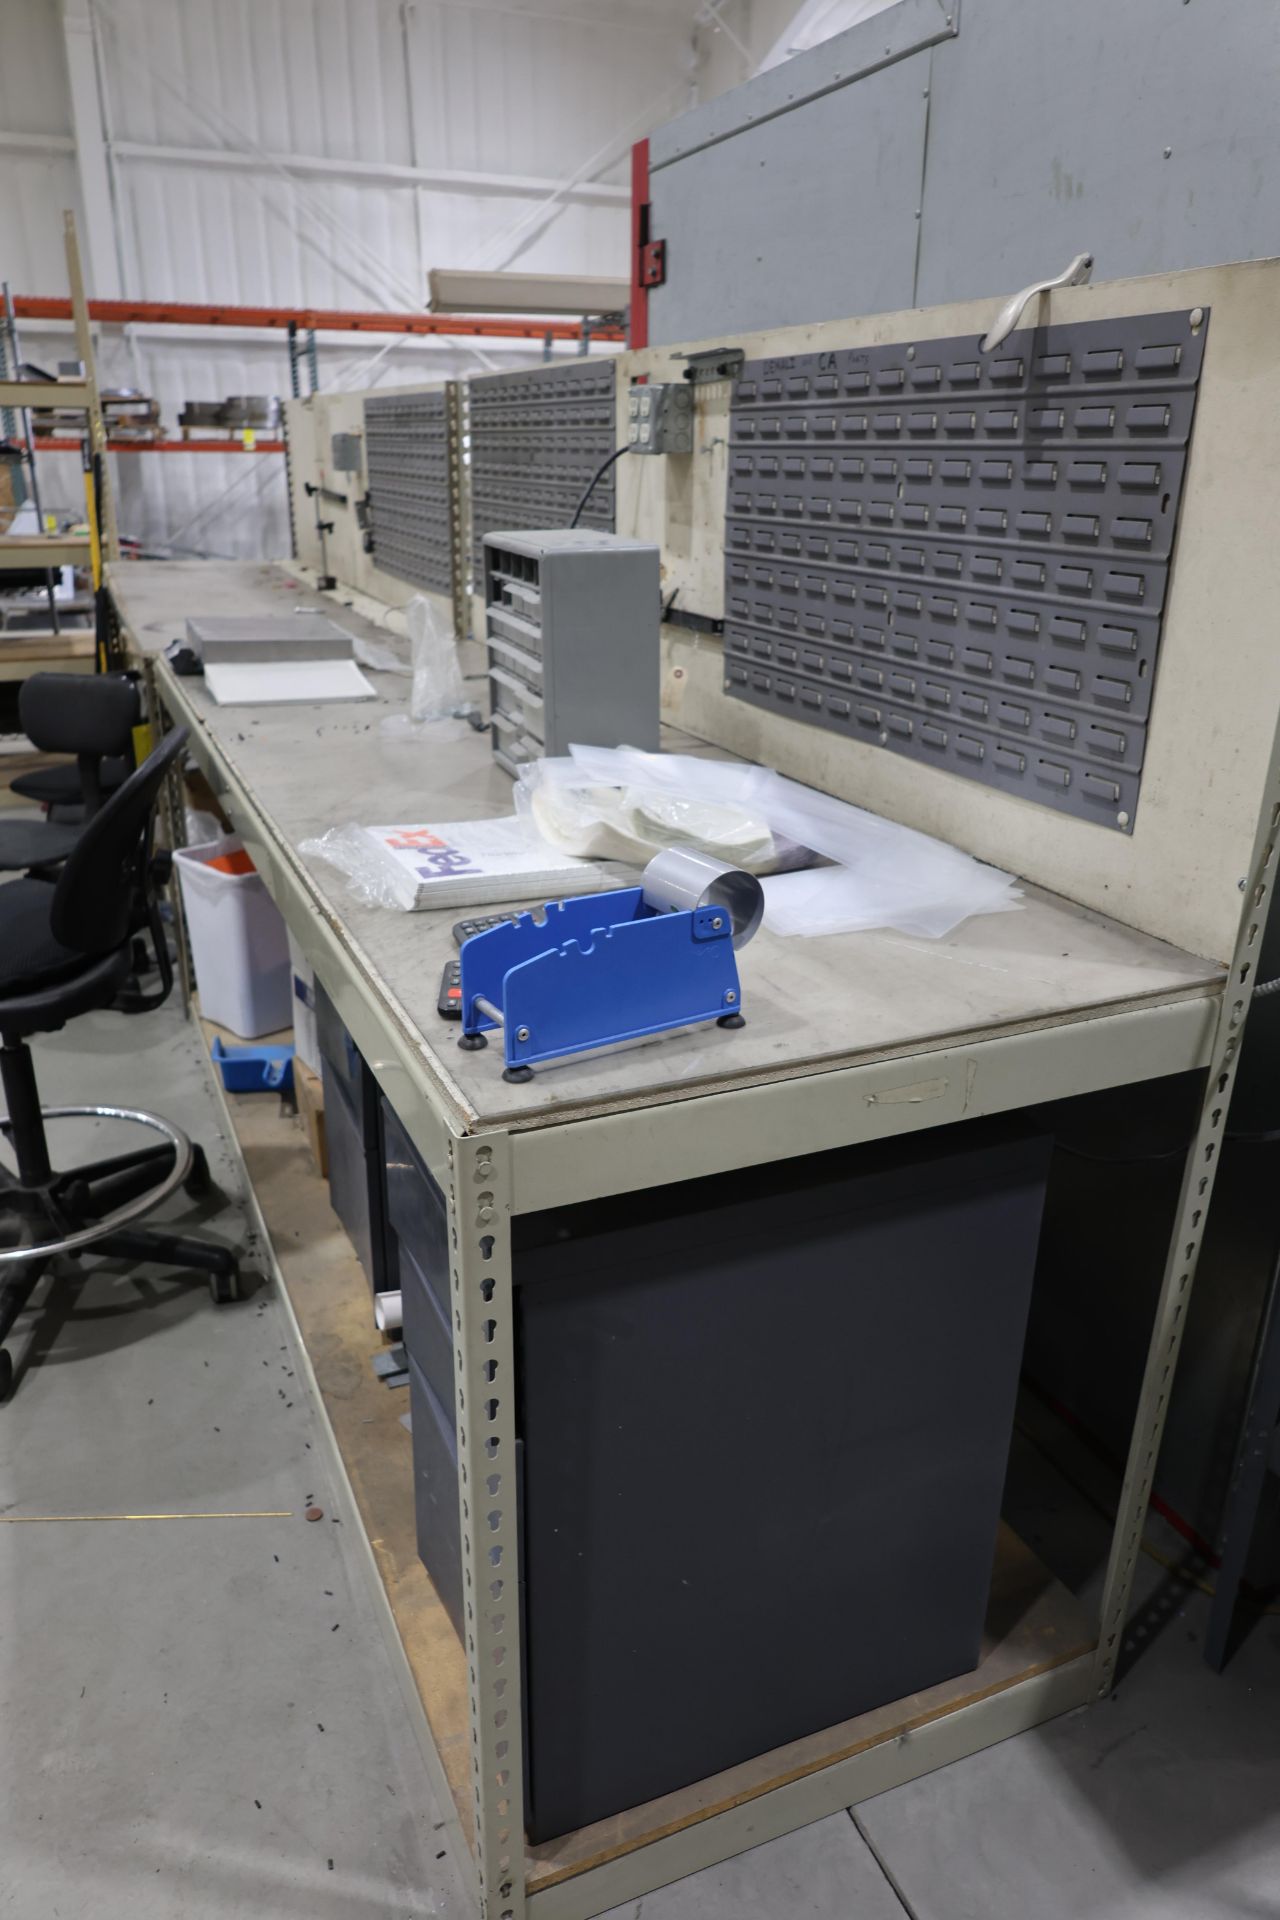 Work Benches, Chairs & Contents - Image 2 of 3